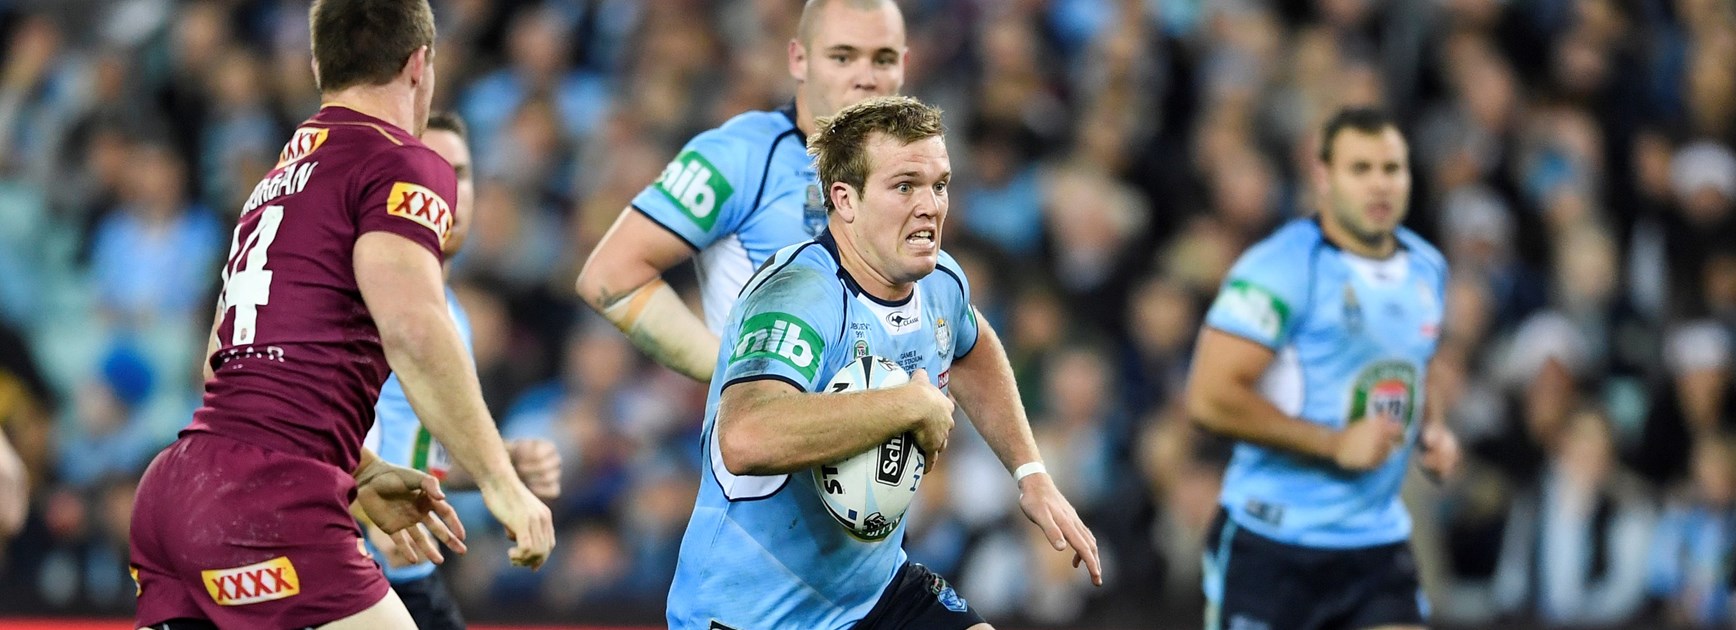 Ranking the Blues forward candidates for Origin